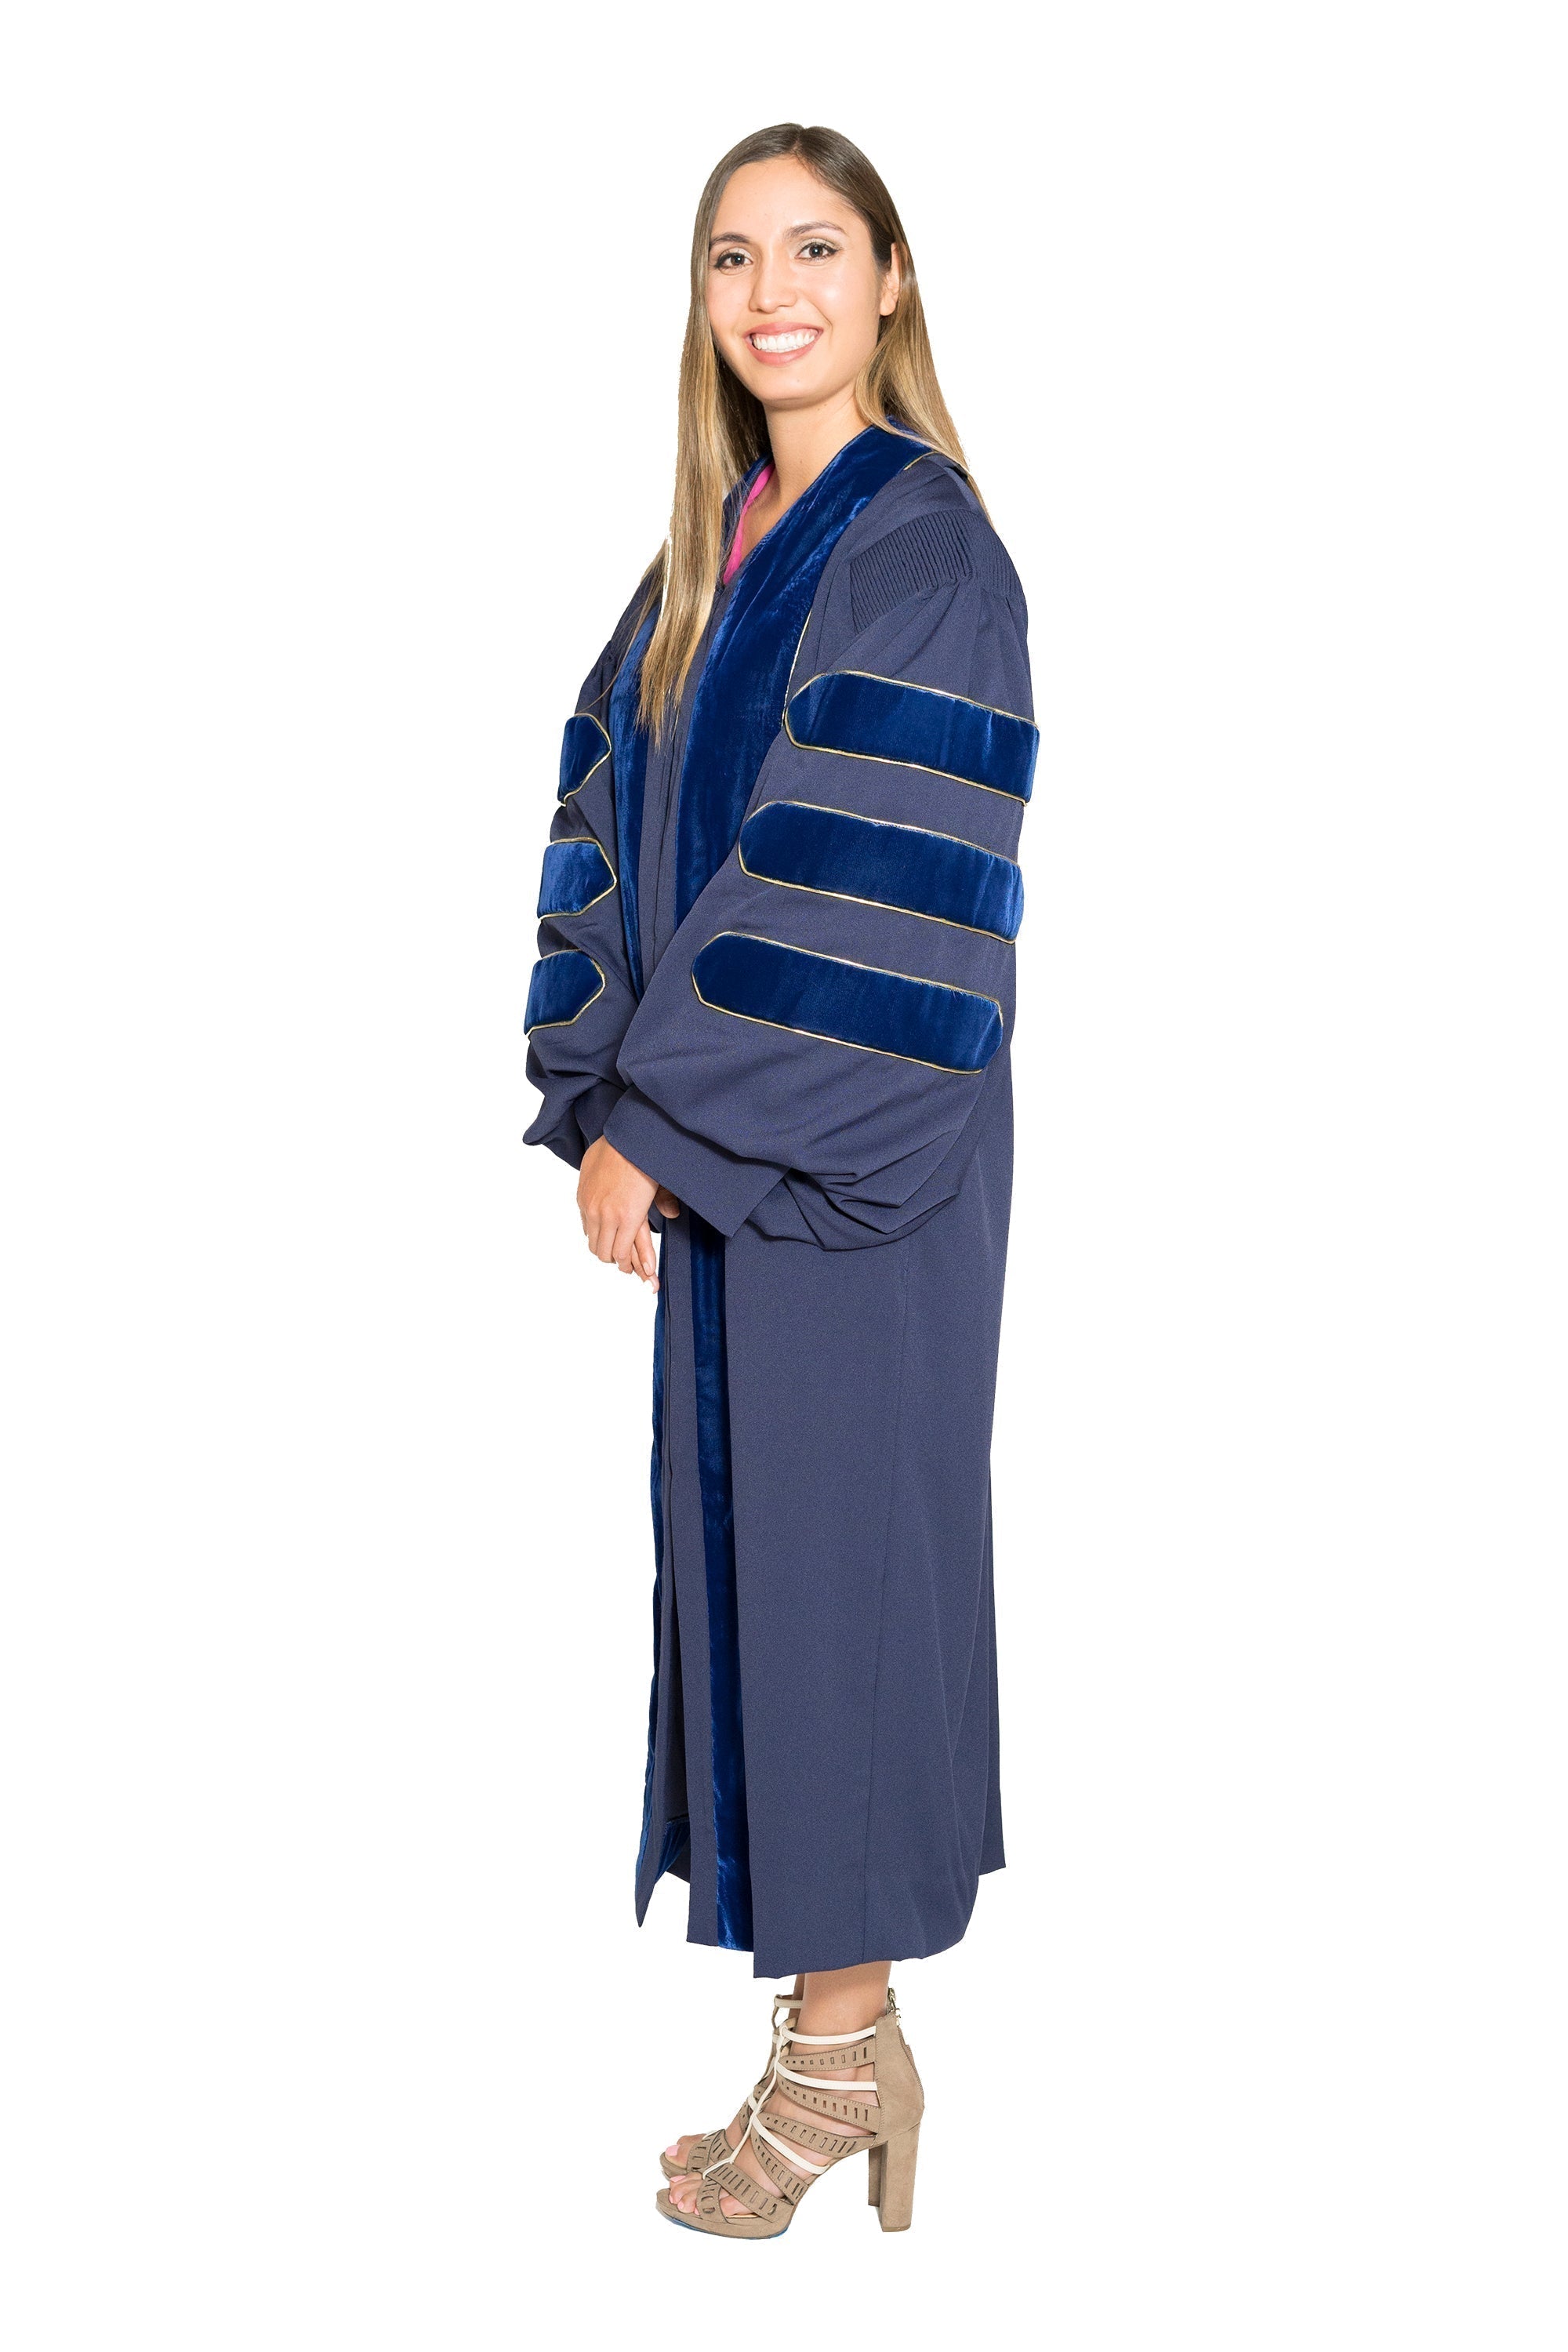 UC San Francisco PhD Doctoral Gown